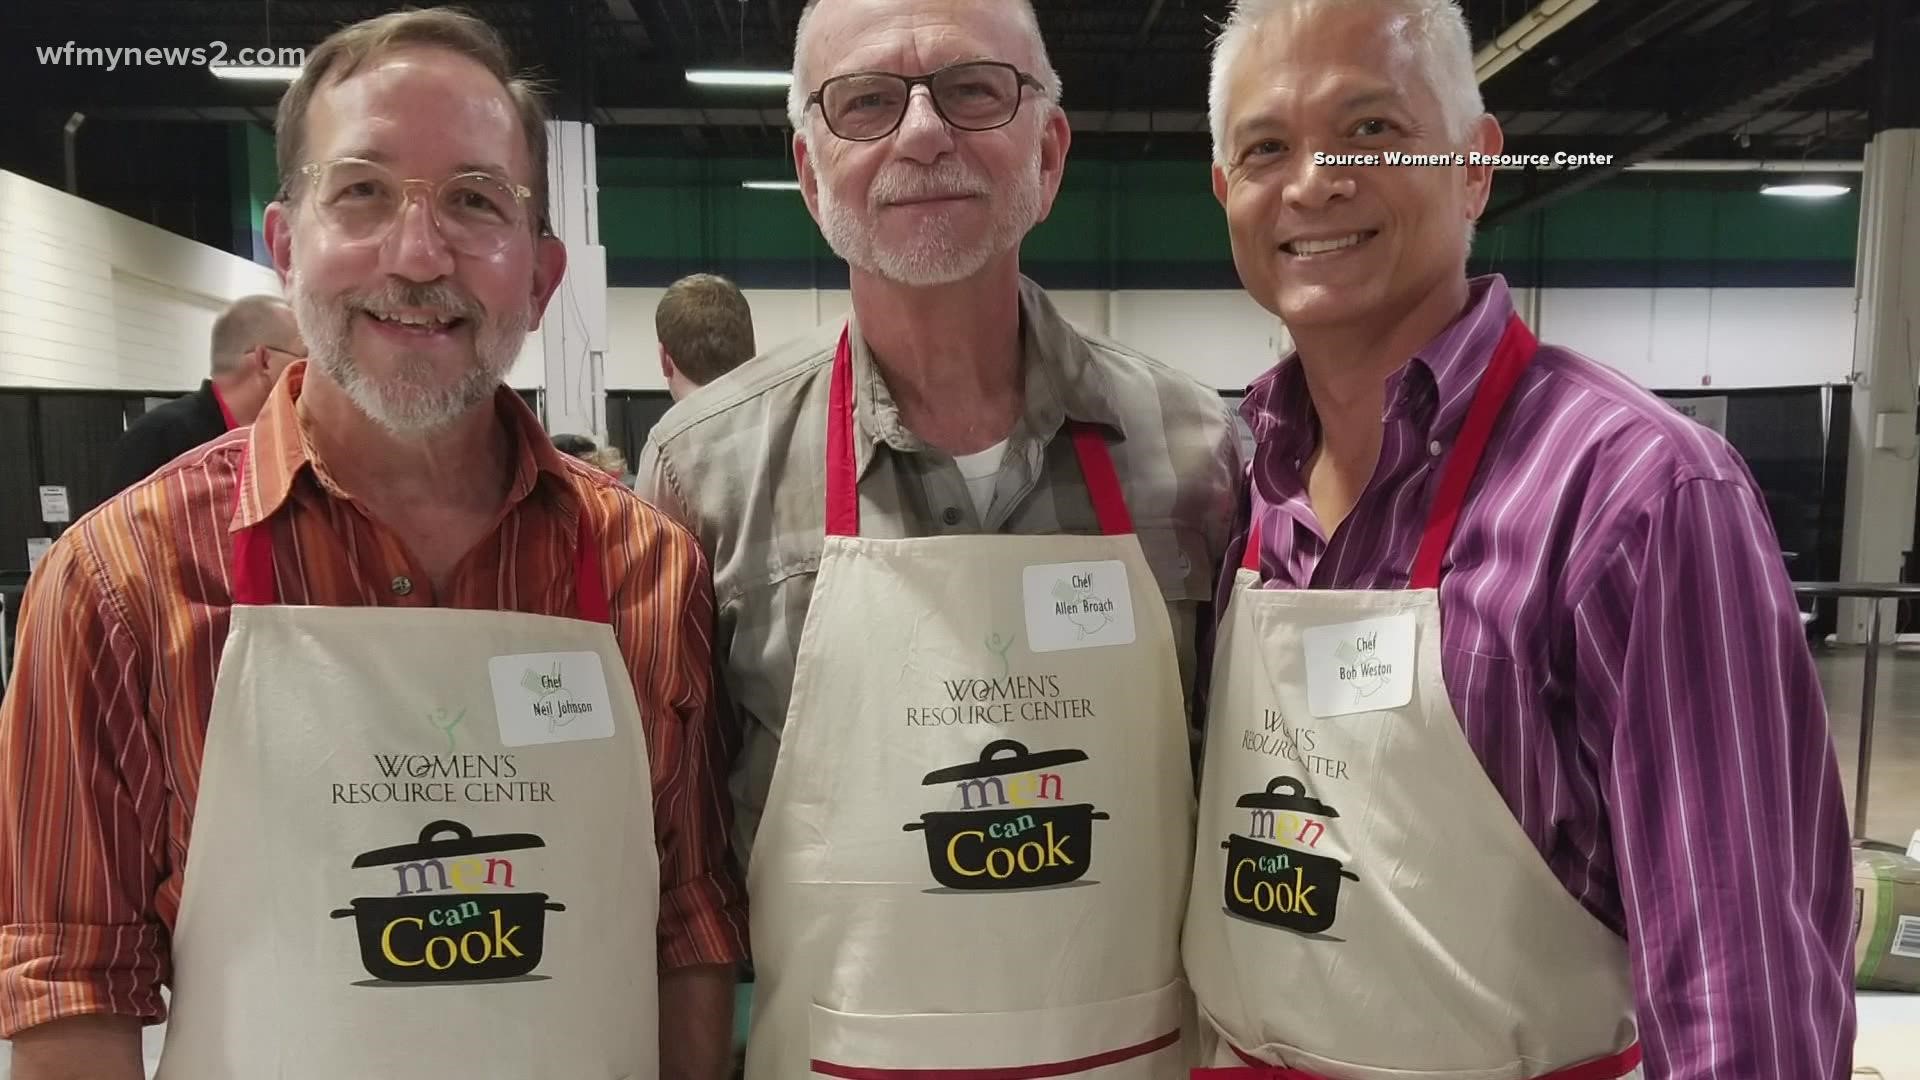 The ‘Men Can Cook’ fundraiser is the Women’s Resource Center of Greensboro’s largest fundraiser, and it’s back after a year off.